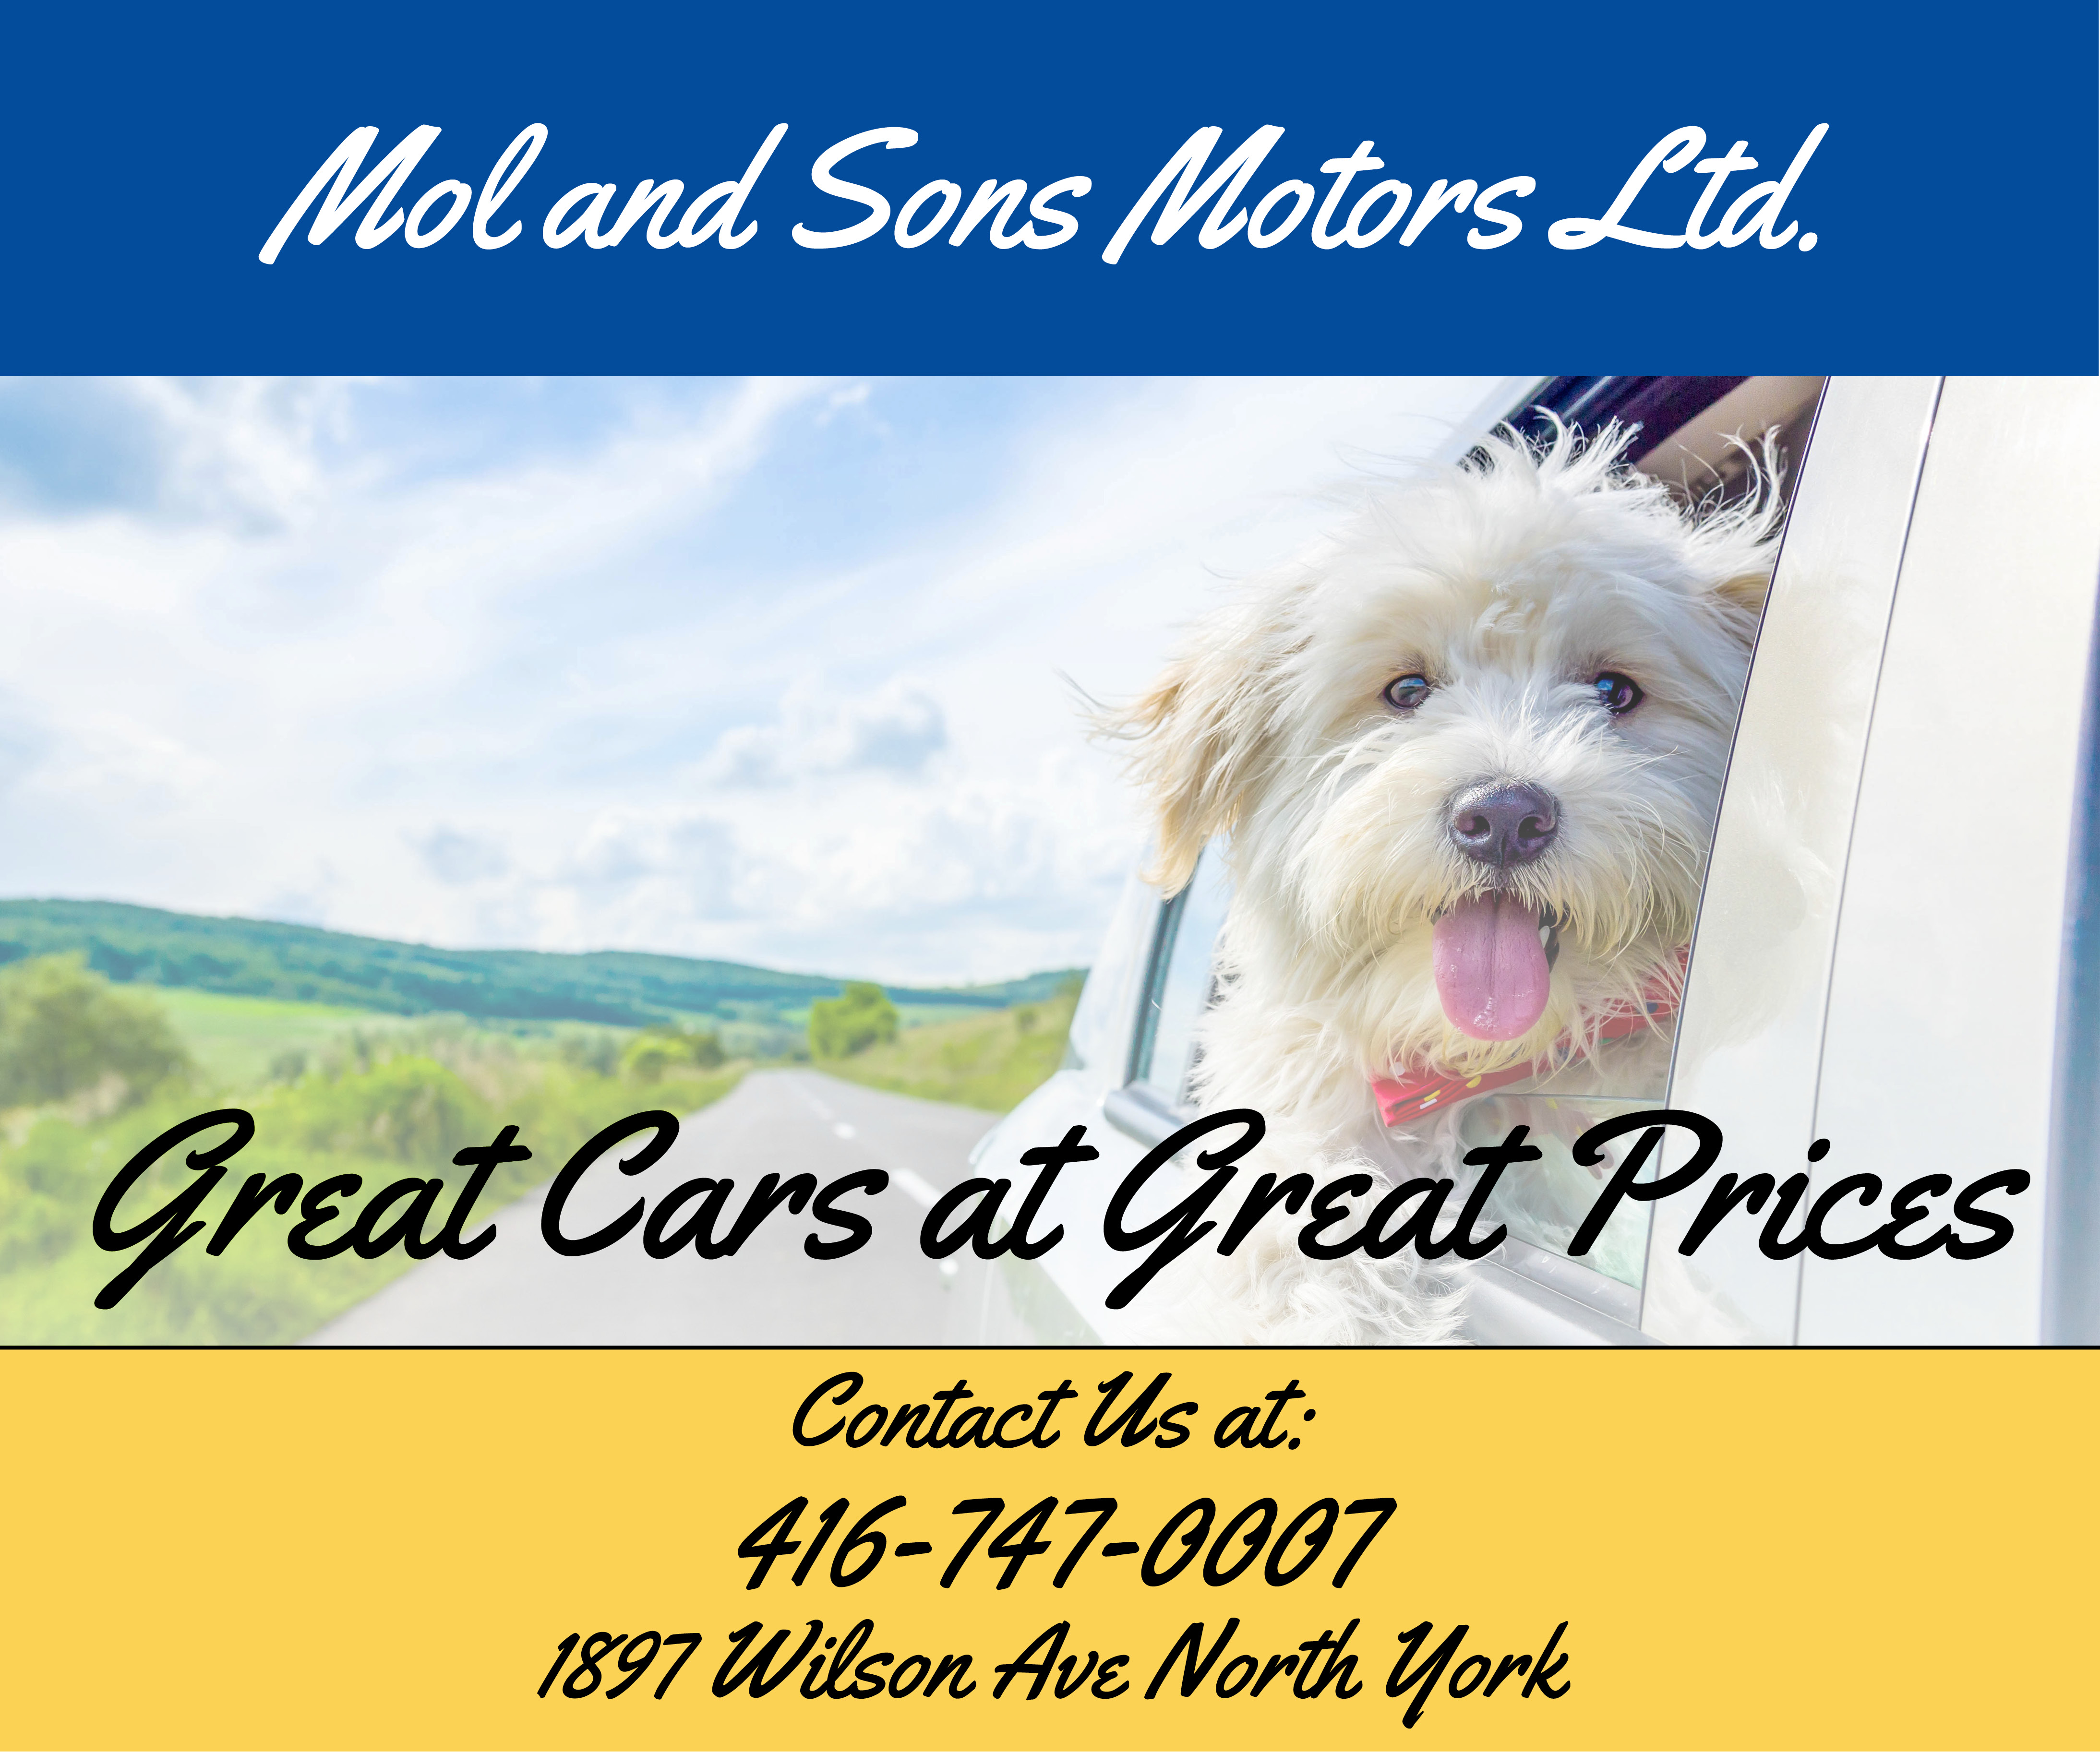 More from Mol and Sons Motors Ltd.